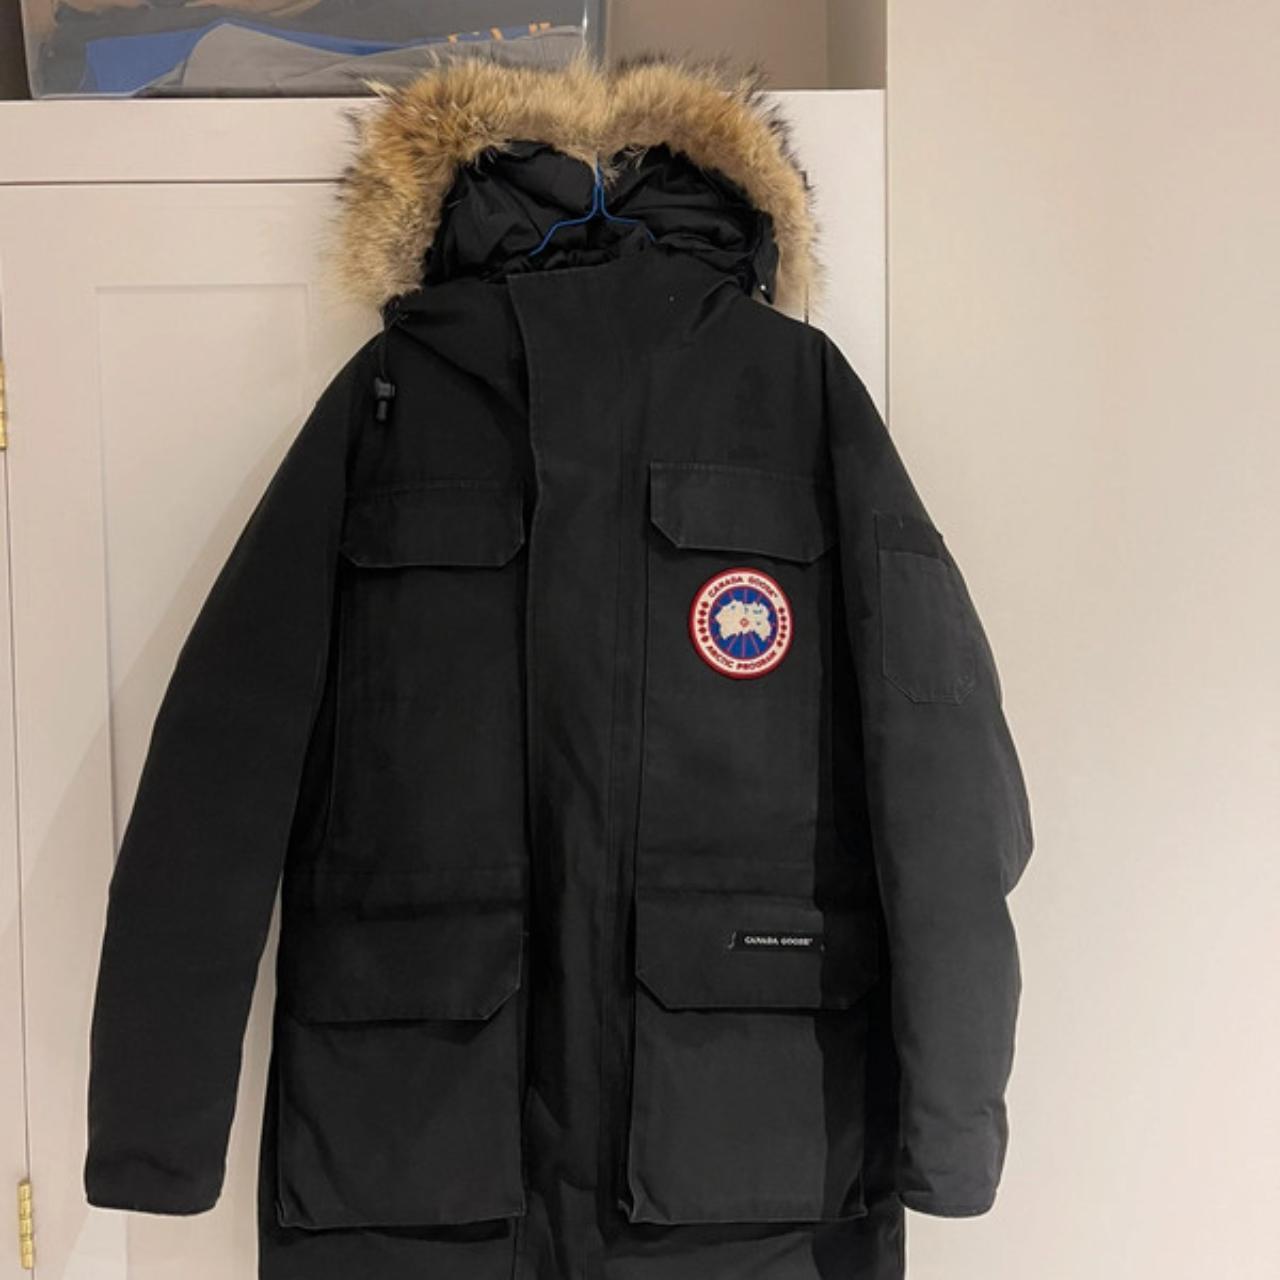 Canada Goose Citadel Parka Proof of purchase is in... - Depop